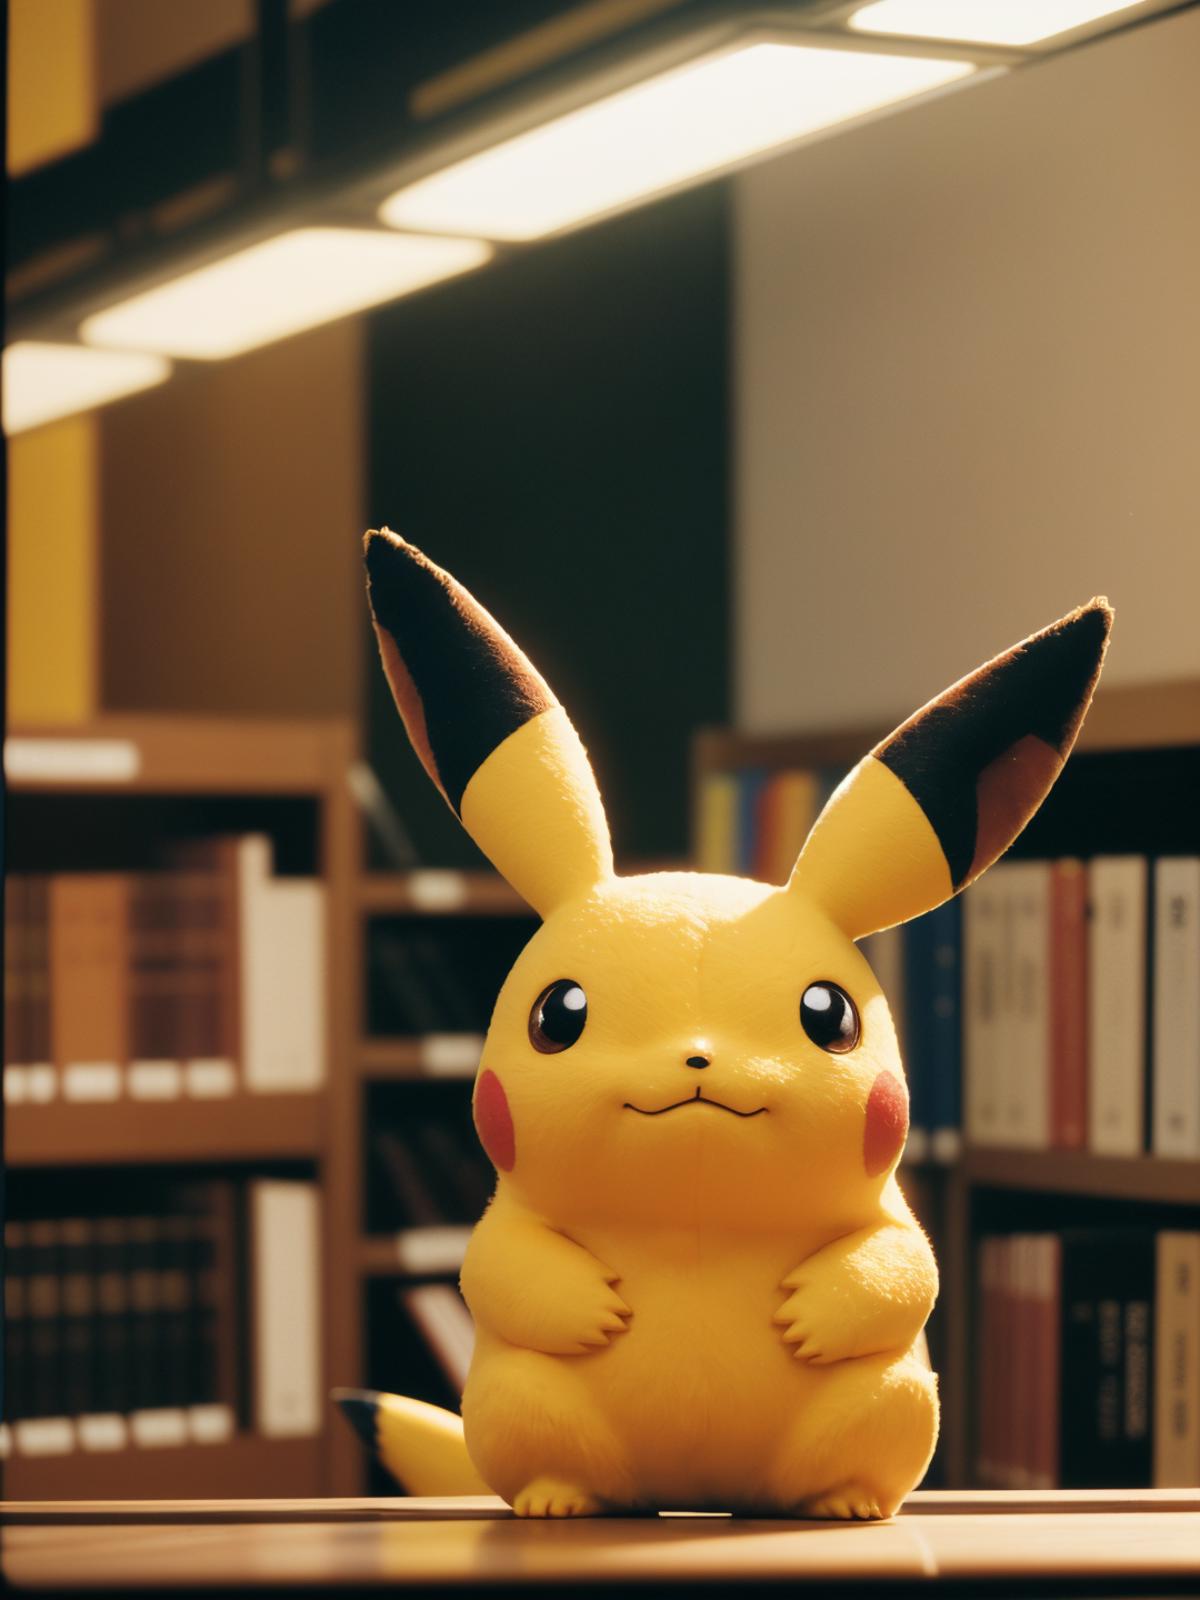 A yellow Pikachu sitting on a shelf with books behind him.